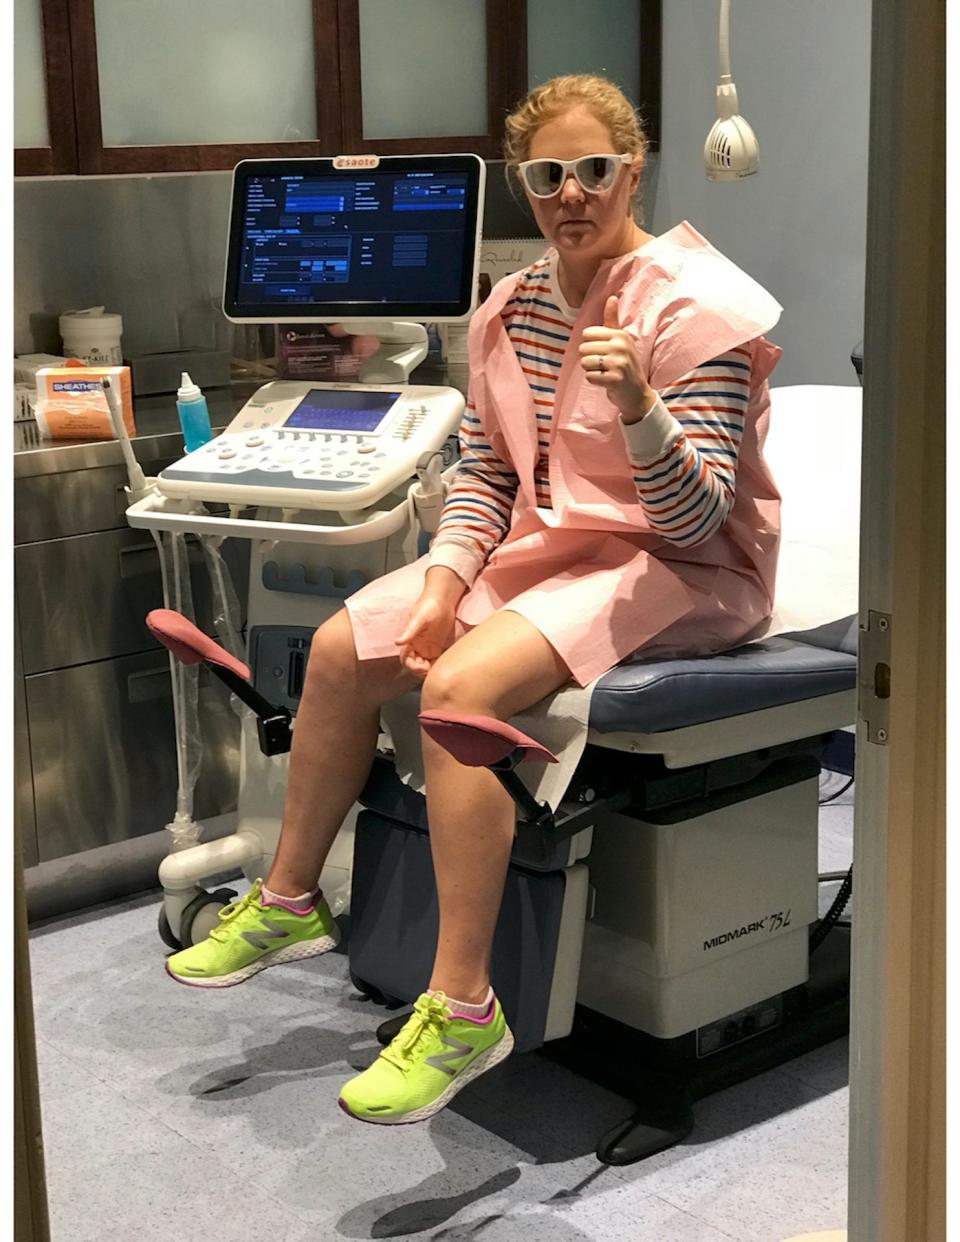 Comedian Amy Schumer gives a thumbs up at a doctor's appointment.